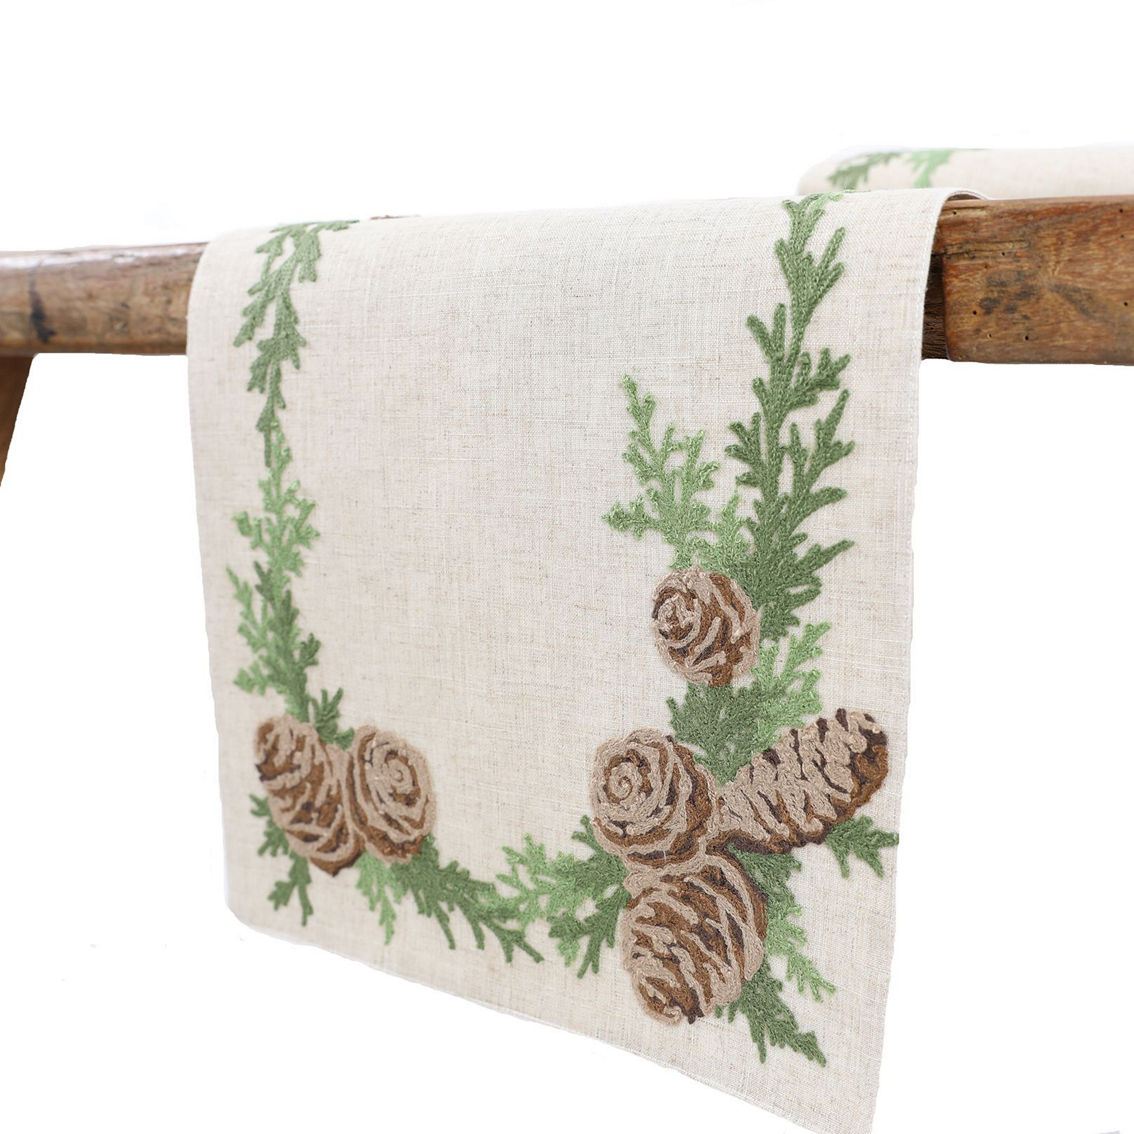 Manor Luxe Winter Pine Cones & Branches Crewel Embroidered Table Runner - Image 3 of 3